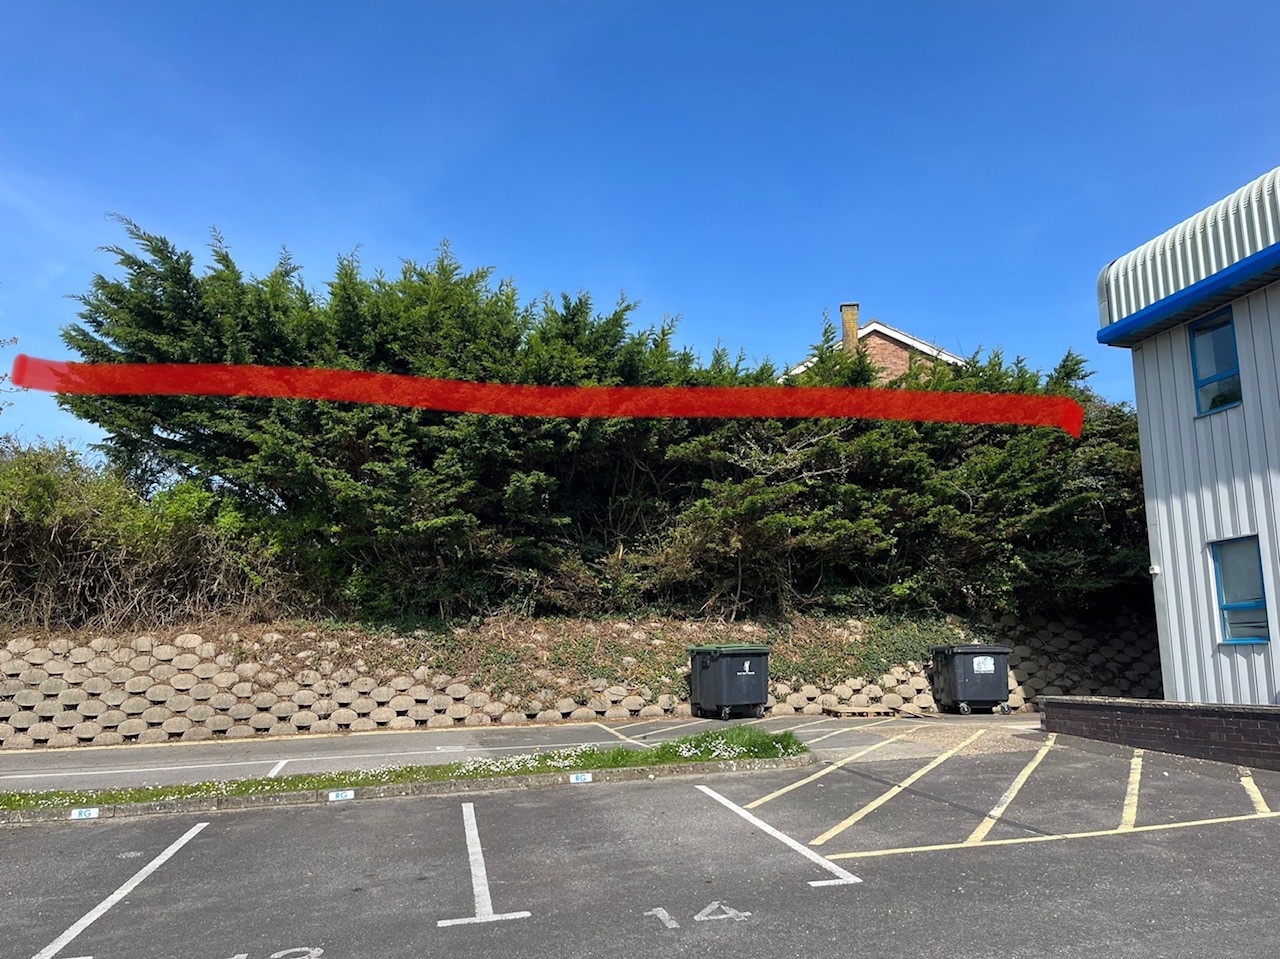 Hedge reduction in height service in Weymouth, Dorchester, Portland, Dorset